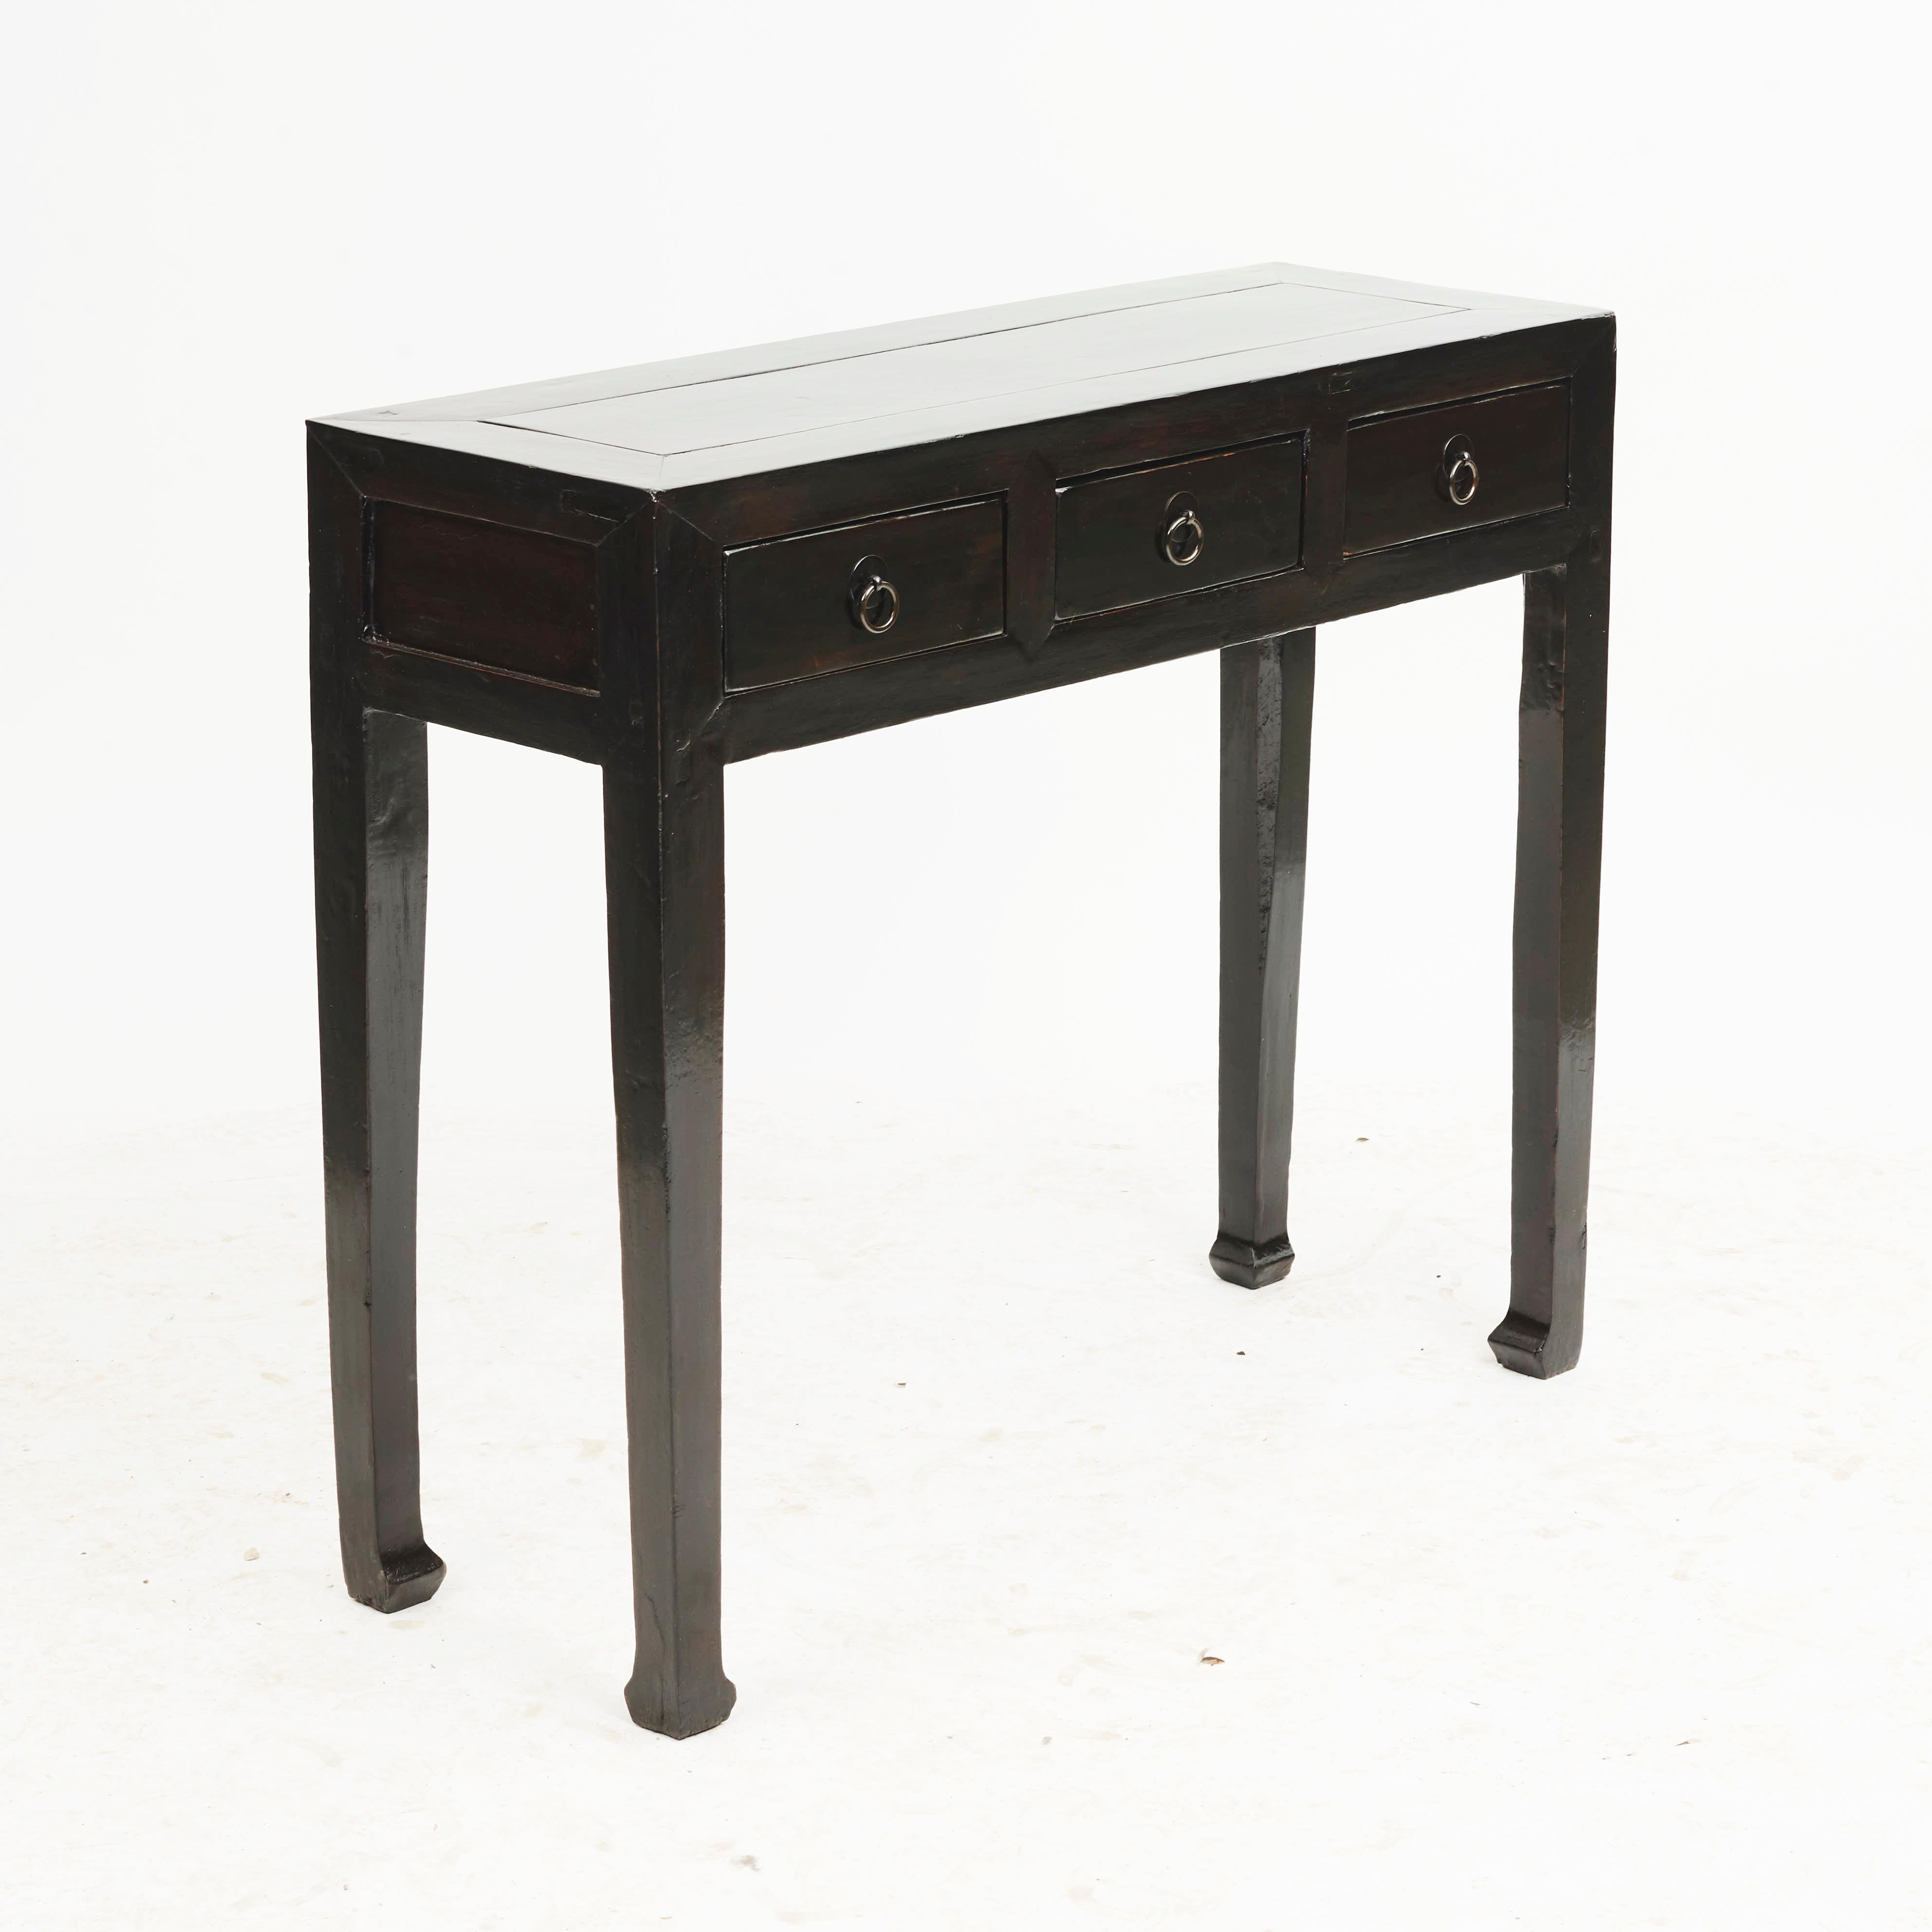 Art Deco, black lacquer console table. 3 drawers with ring pulls.
From Shandong, China, circa 1900-1920.
Freestanding.